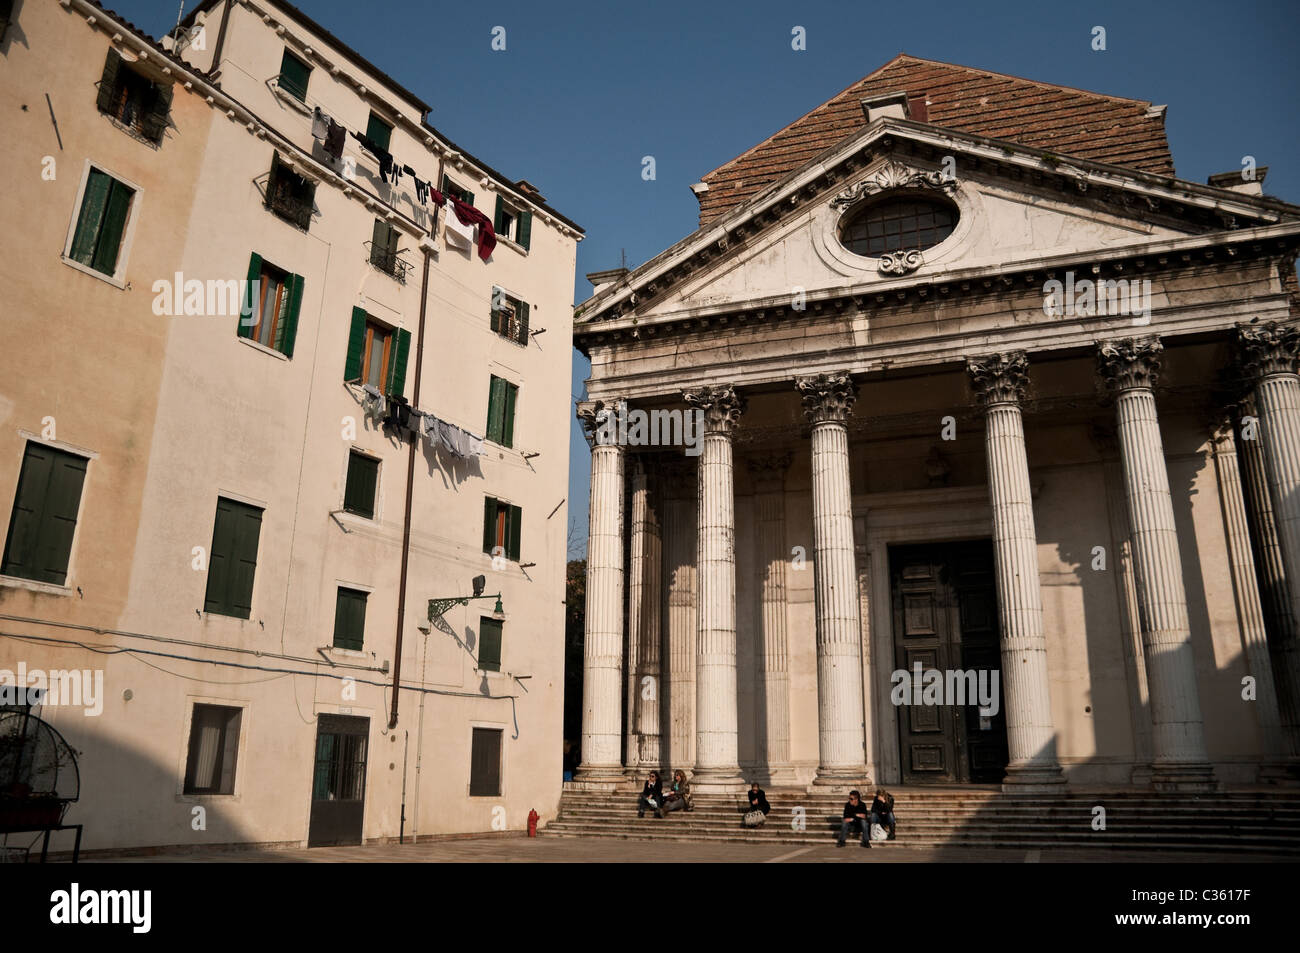 This was taken near one of the universities in Venice, showing the contrast in architecture styles. Stock Photo